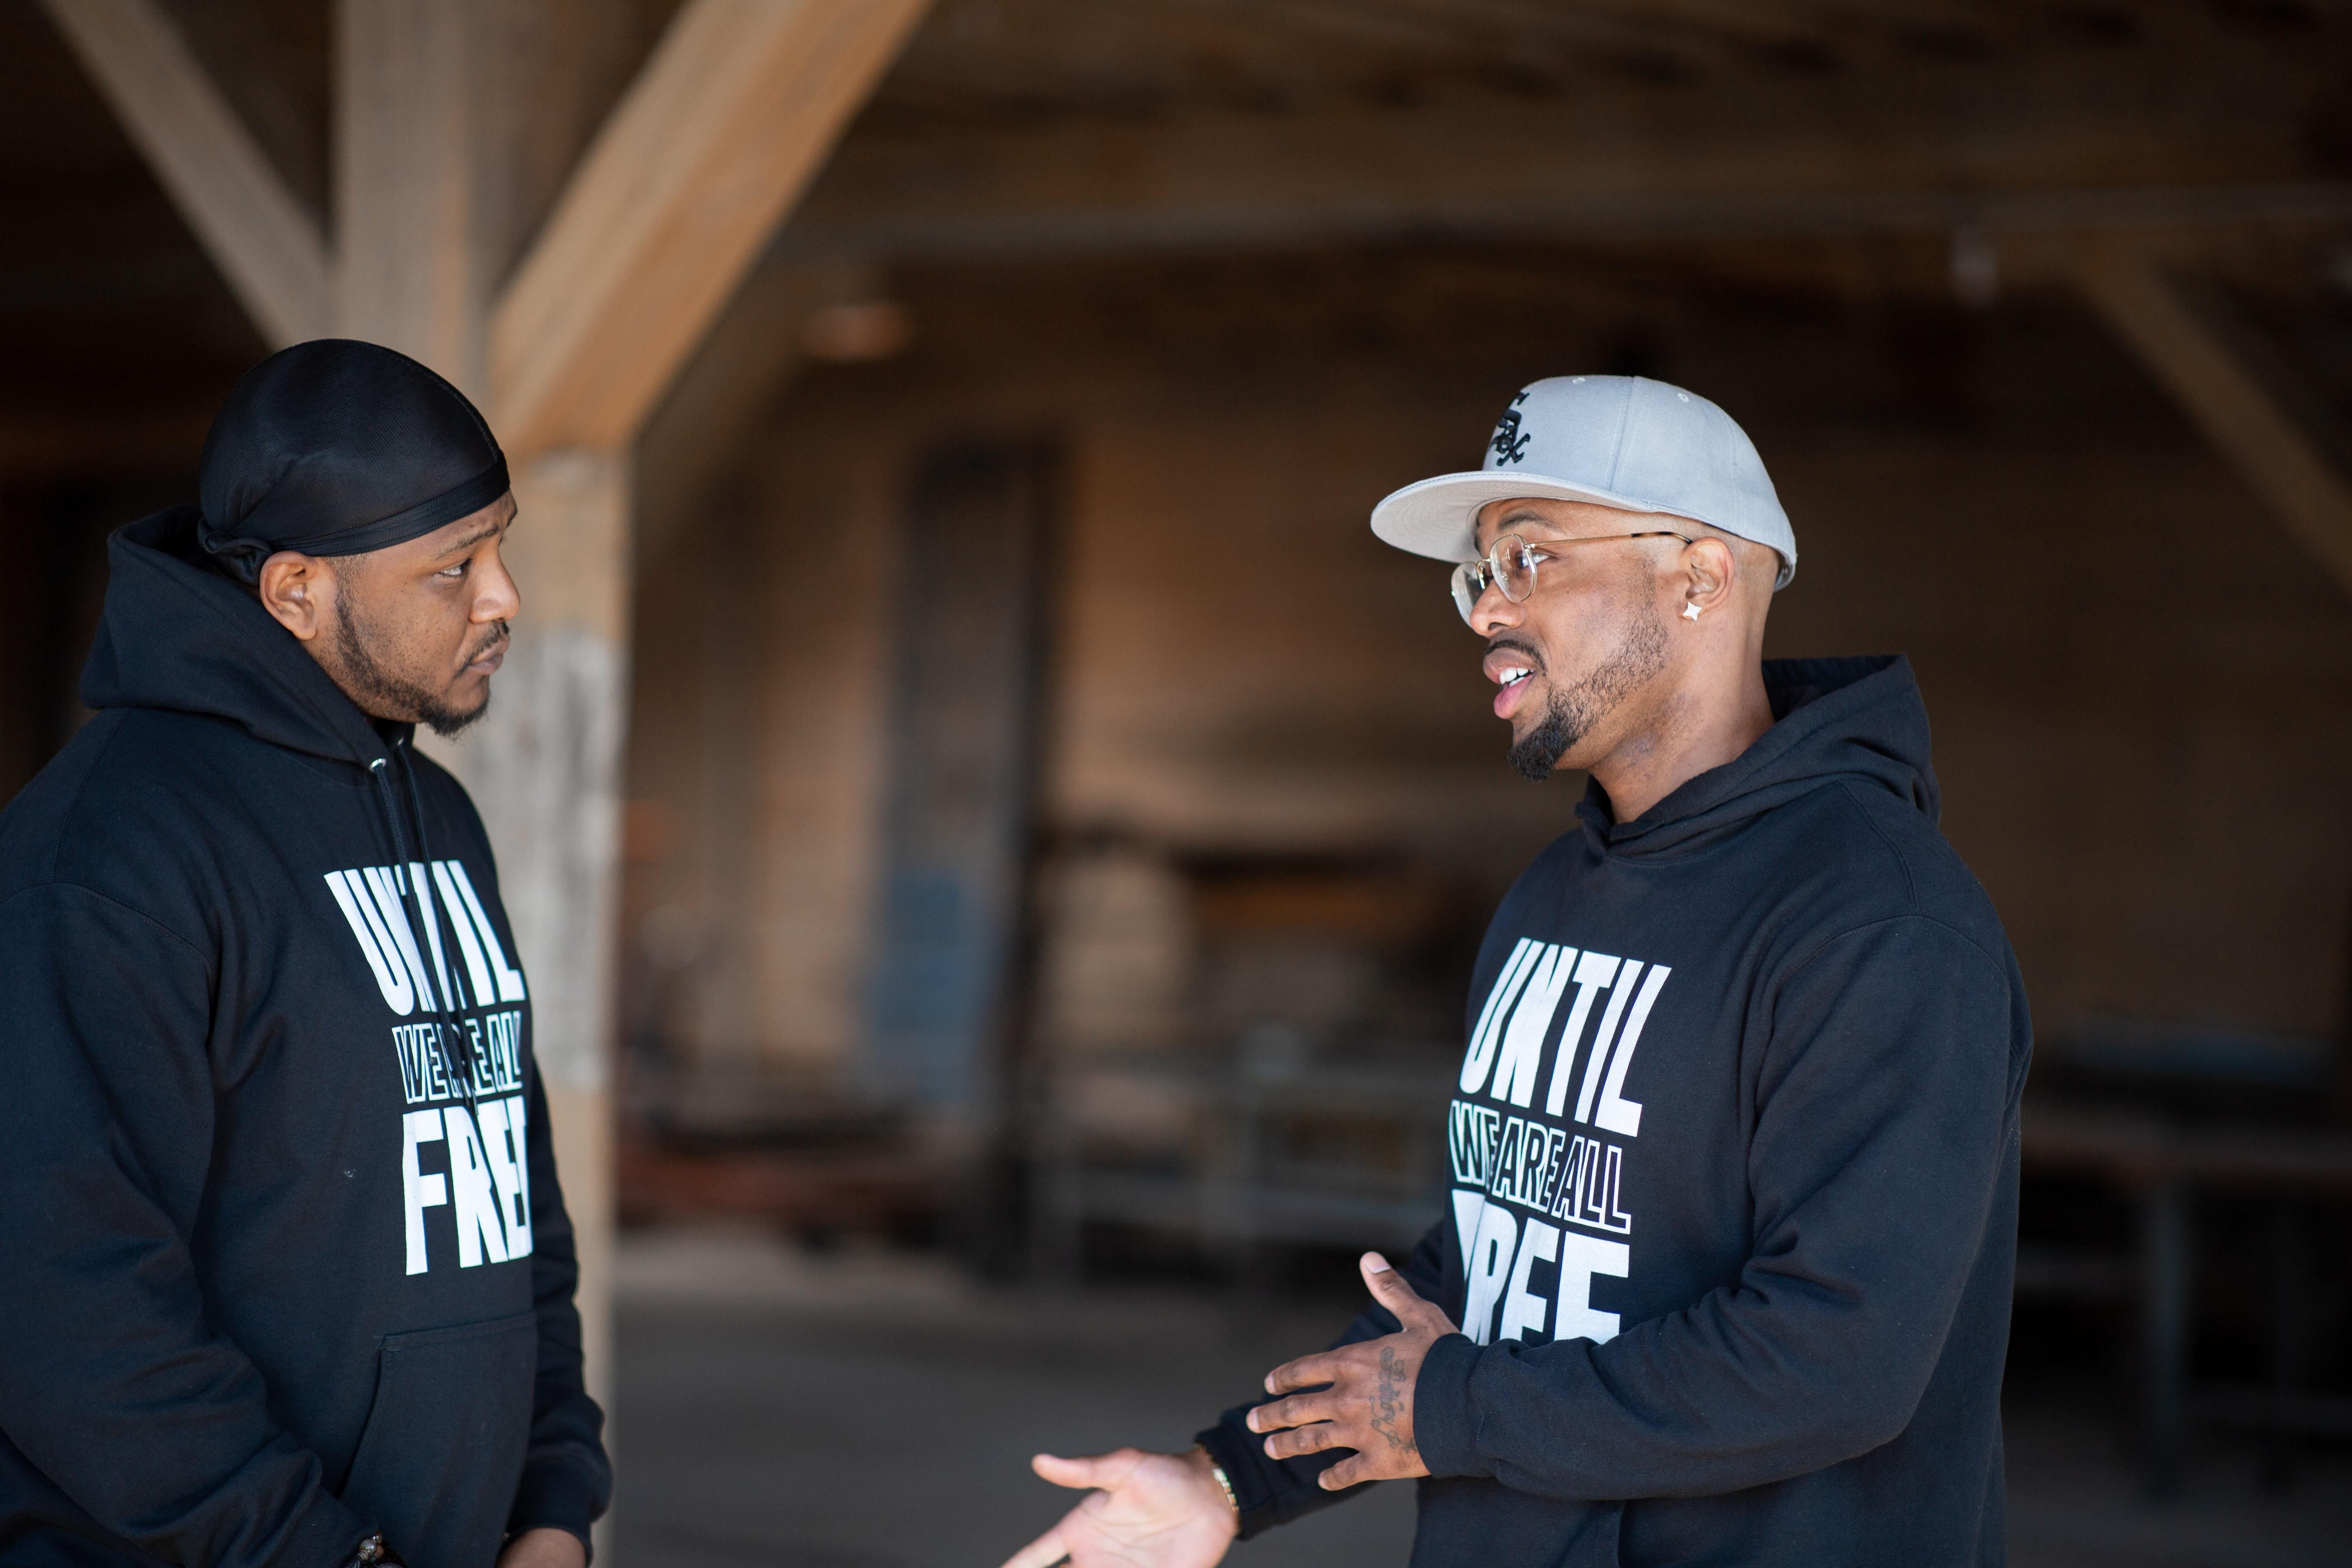 Two men talking to one another wearing hoodies that say "Until we are all free"